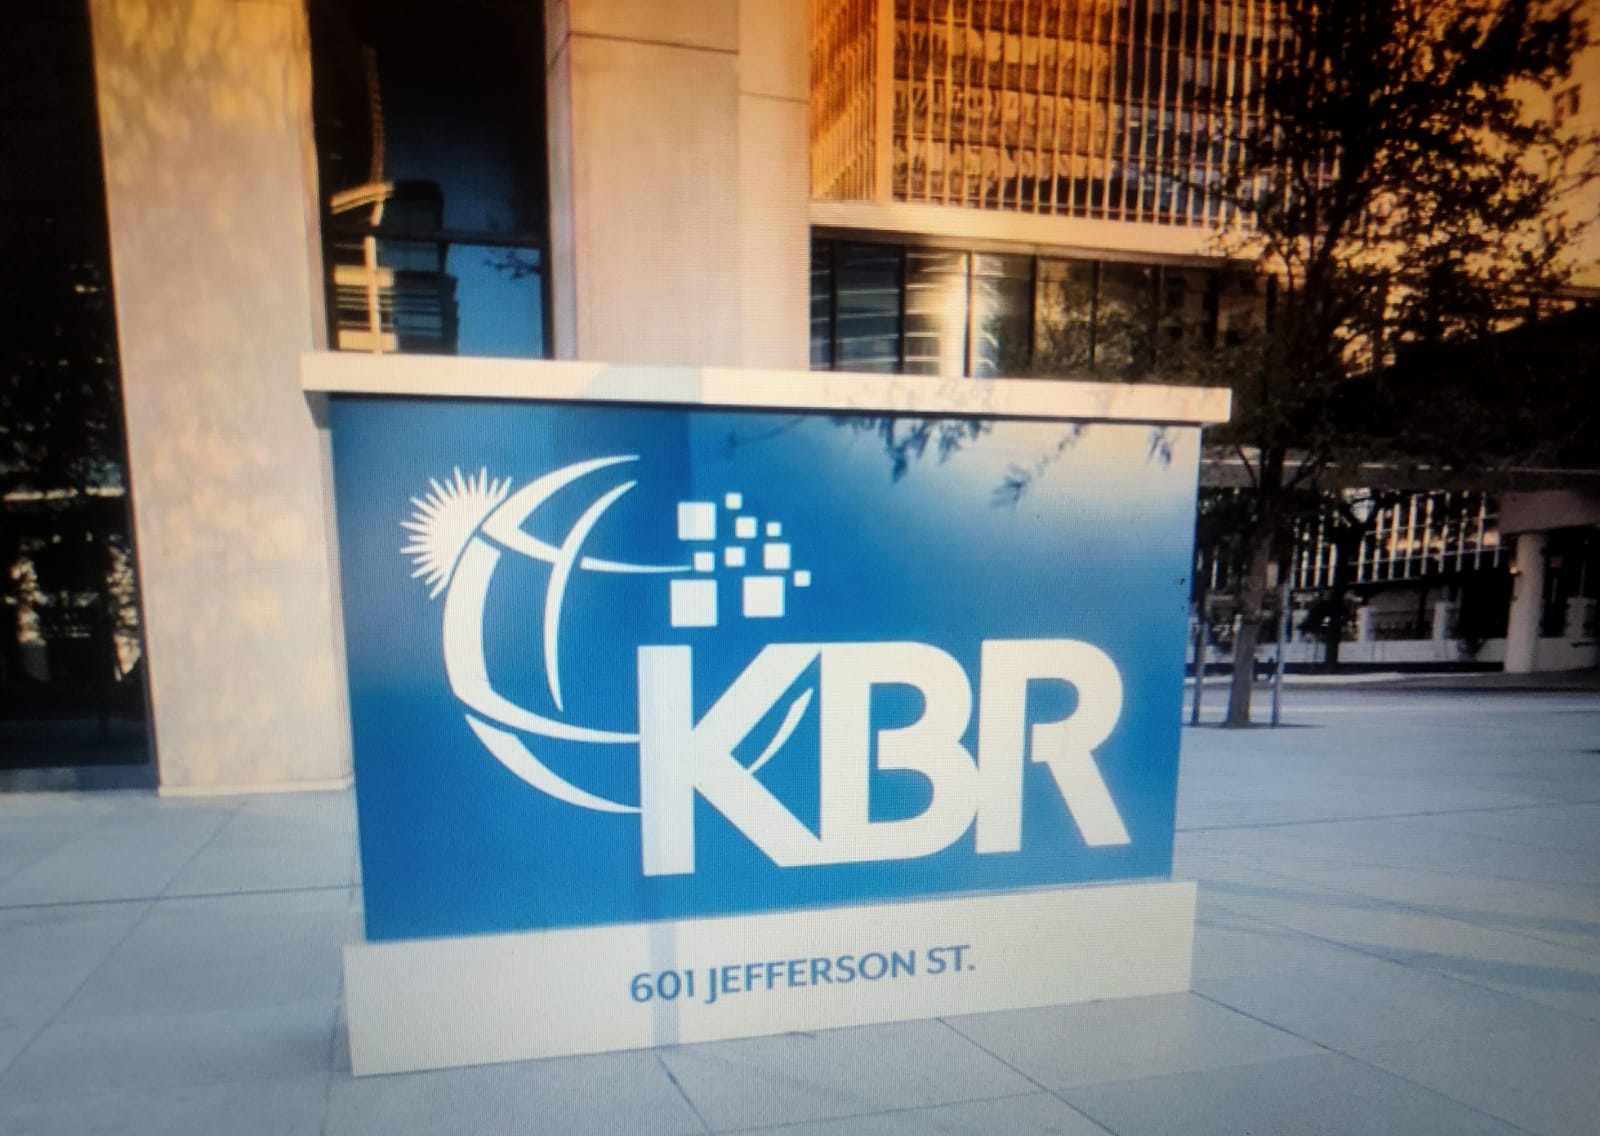 KBR to support hydrogen and ammonia developments with services and proprietary tech